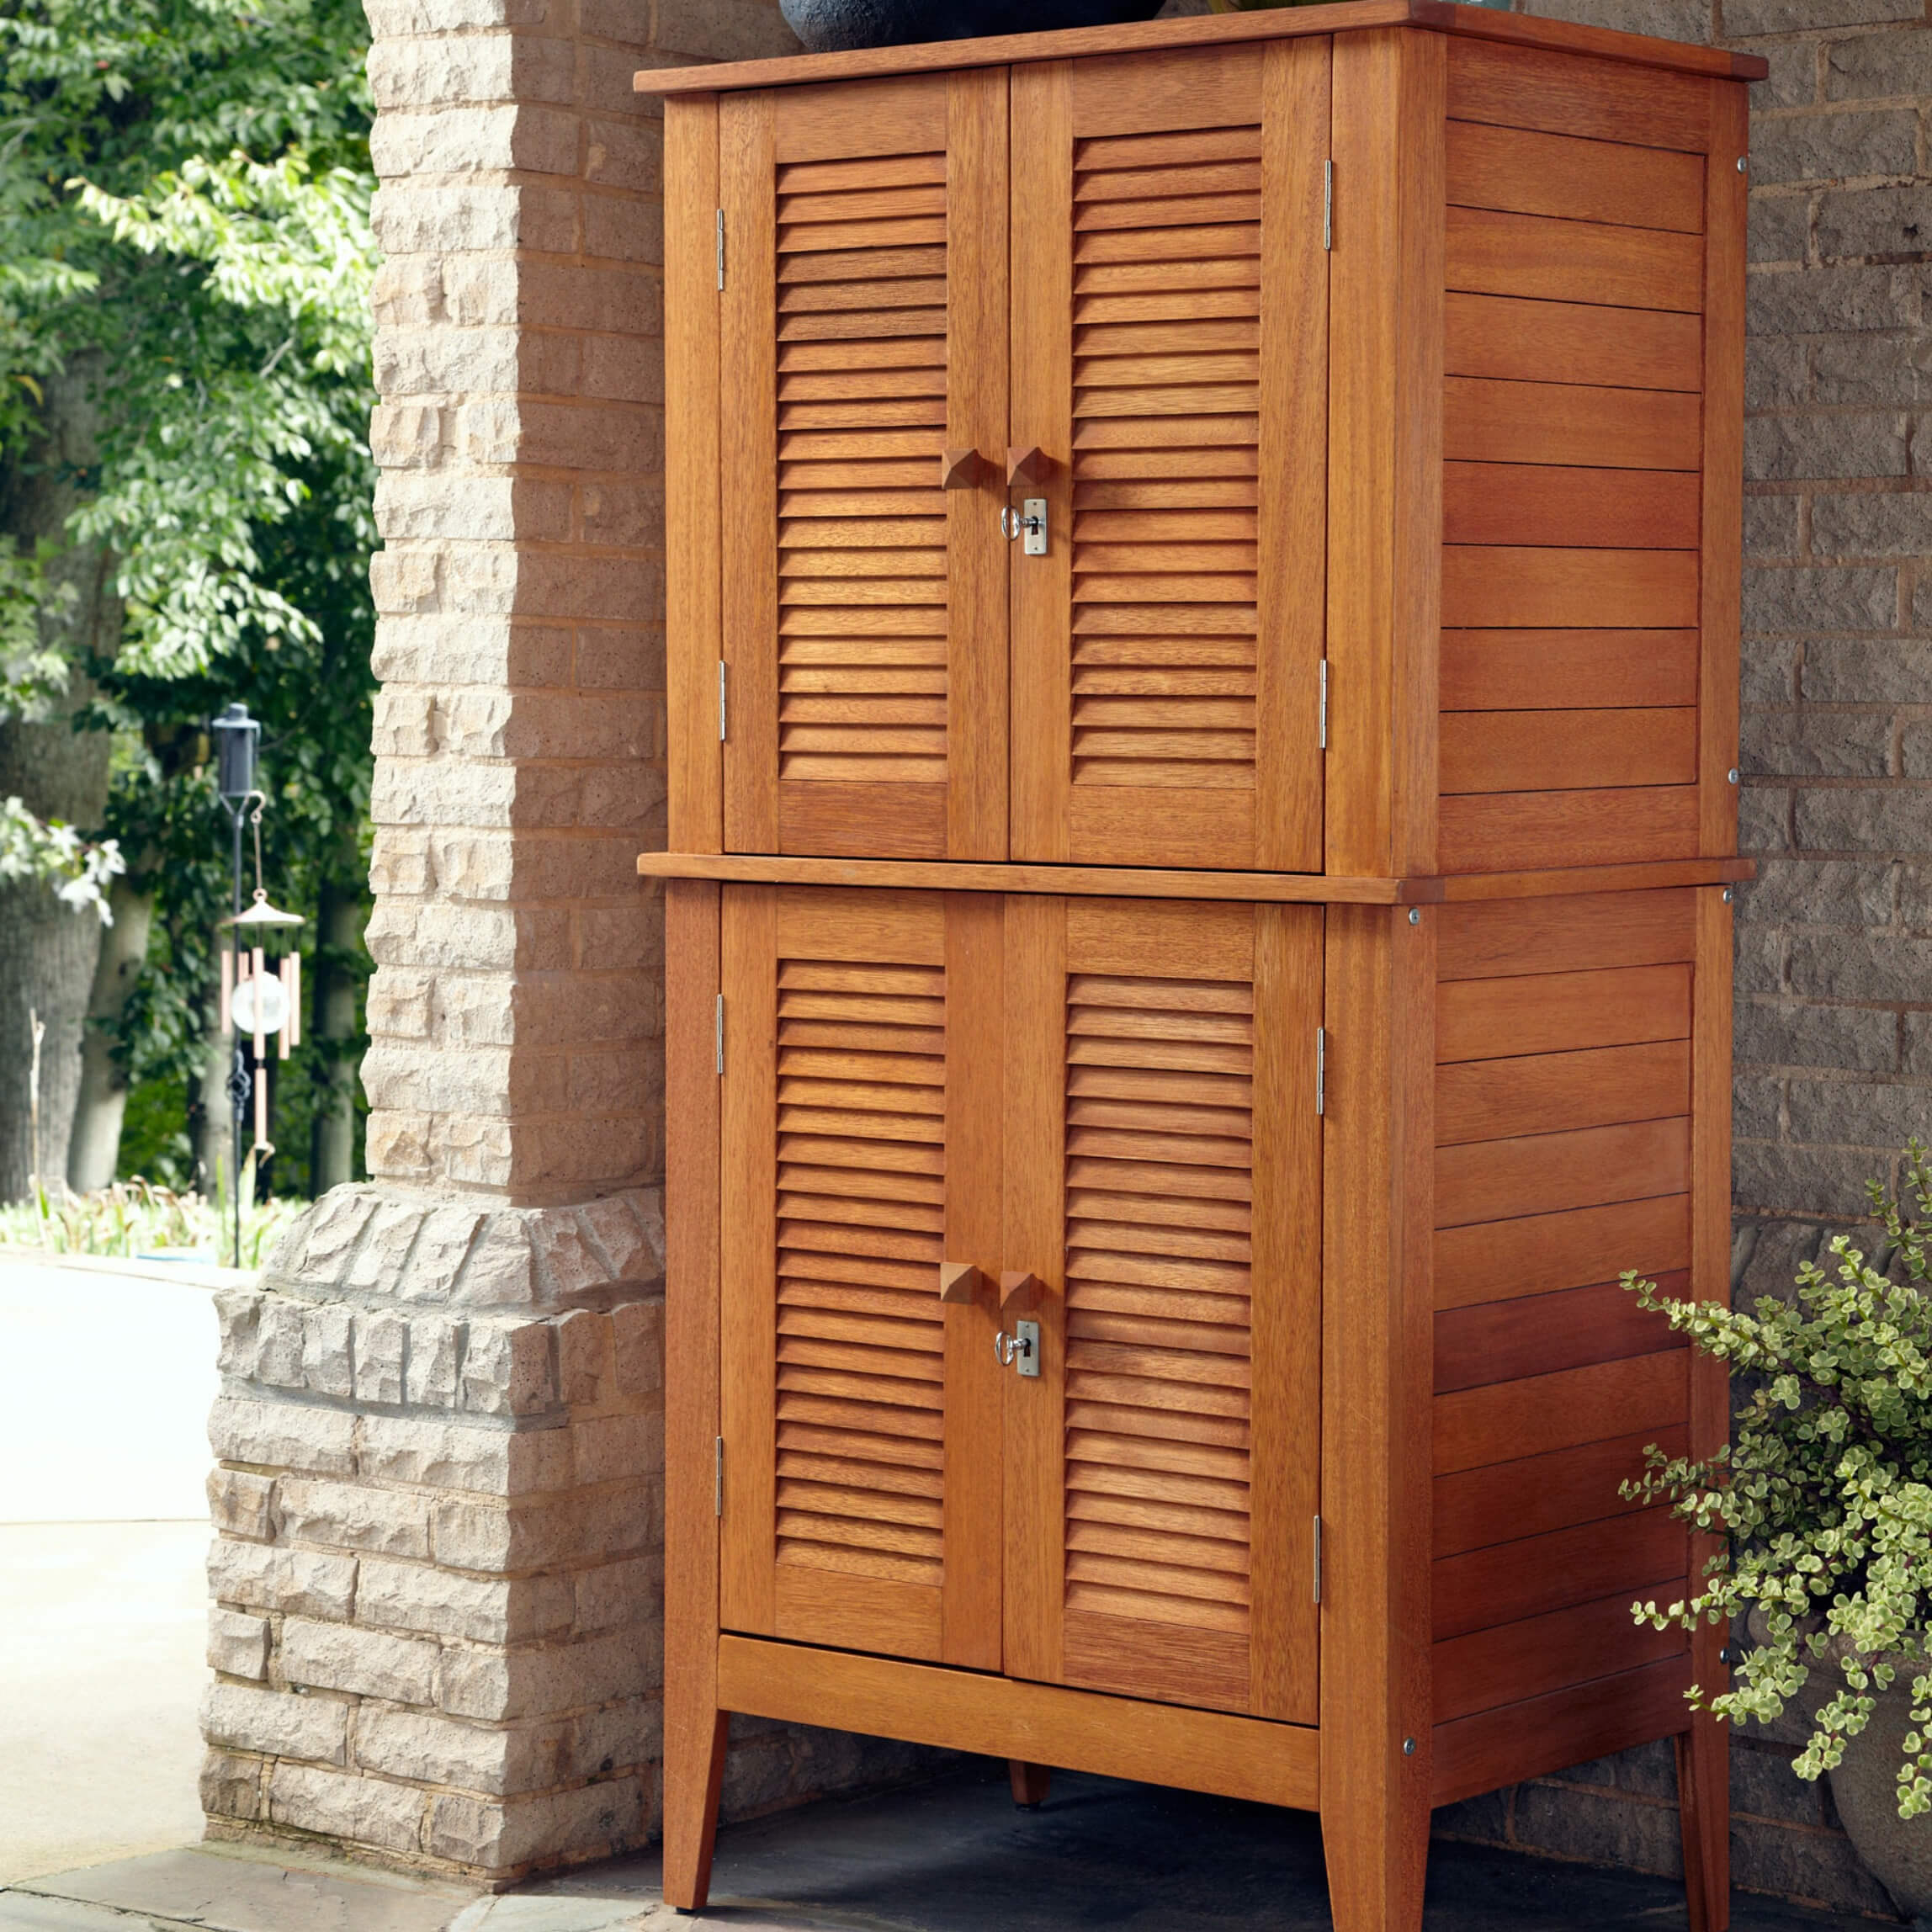 Top 10 Types Of Outdoor Deck Storage Boxes within dimensions 2296 X 2296